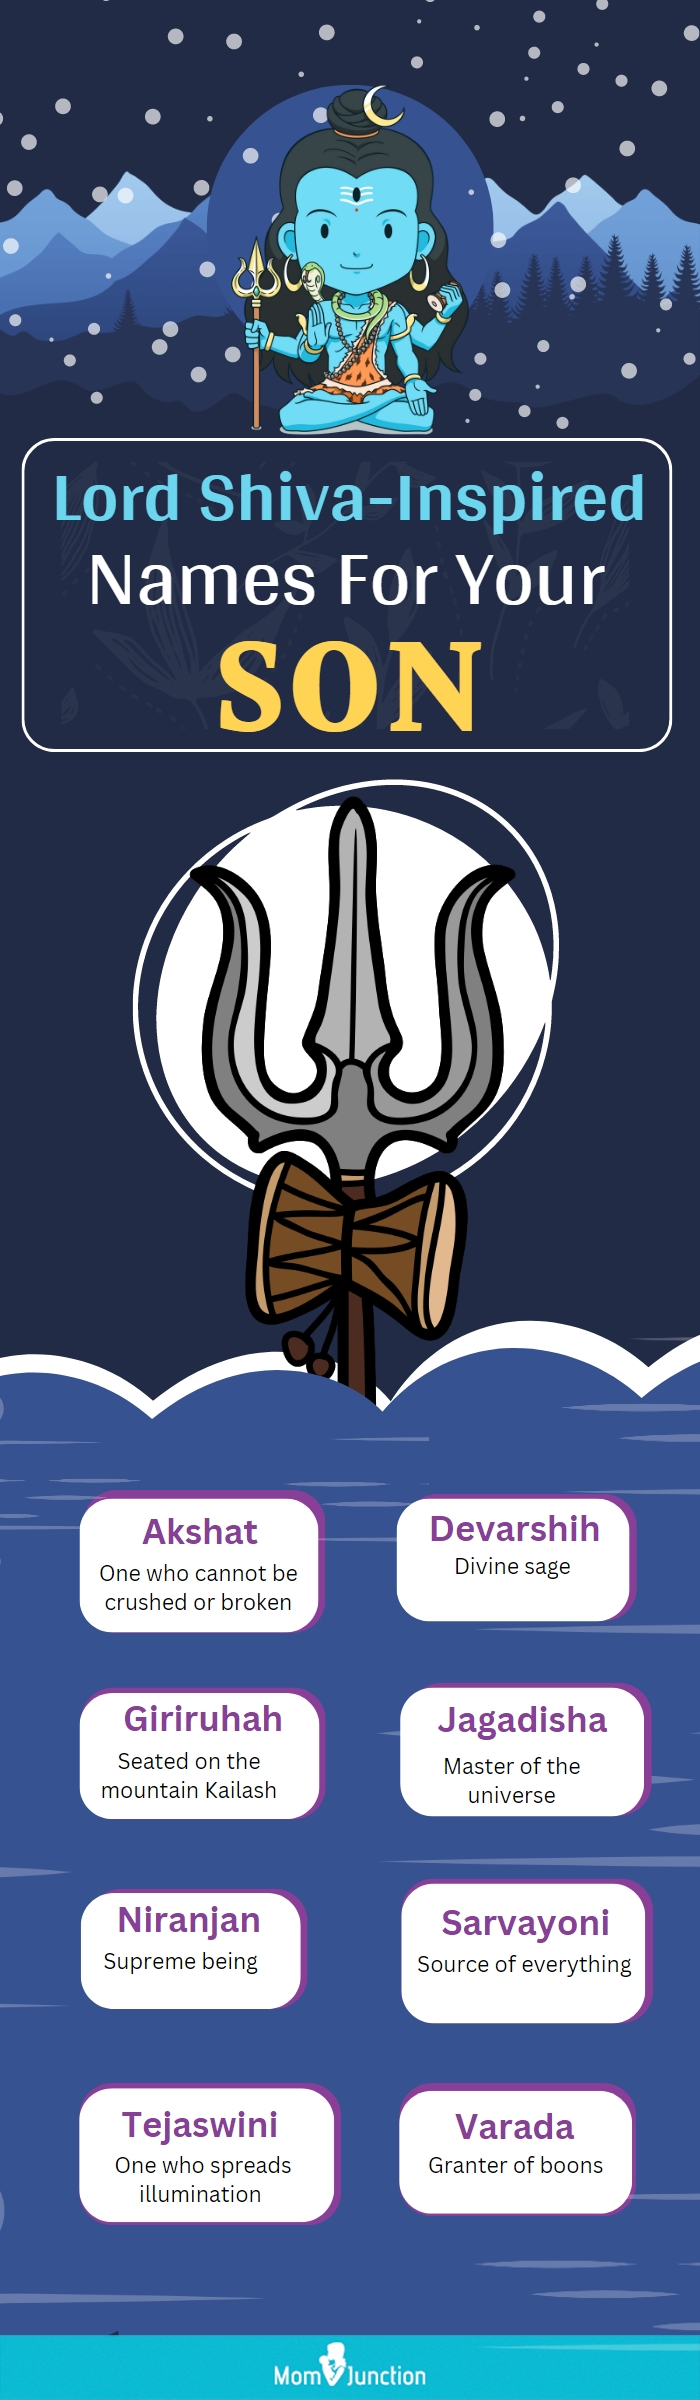 lord shiva inspired names for your son (infographic)